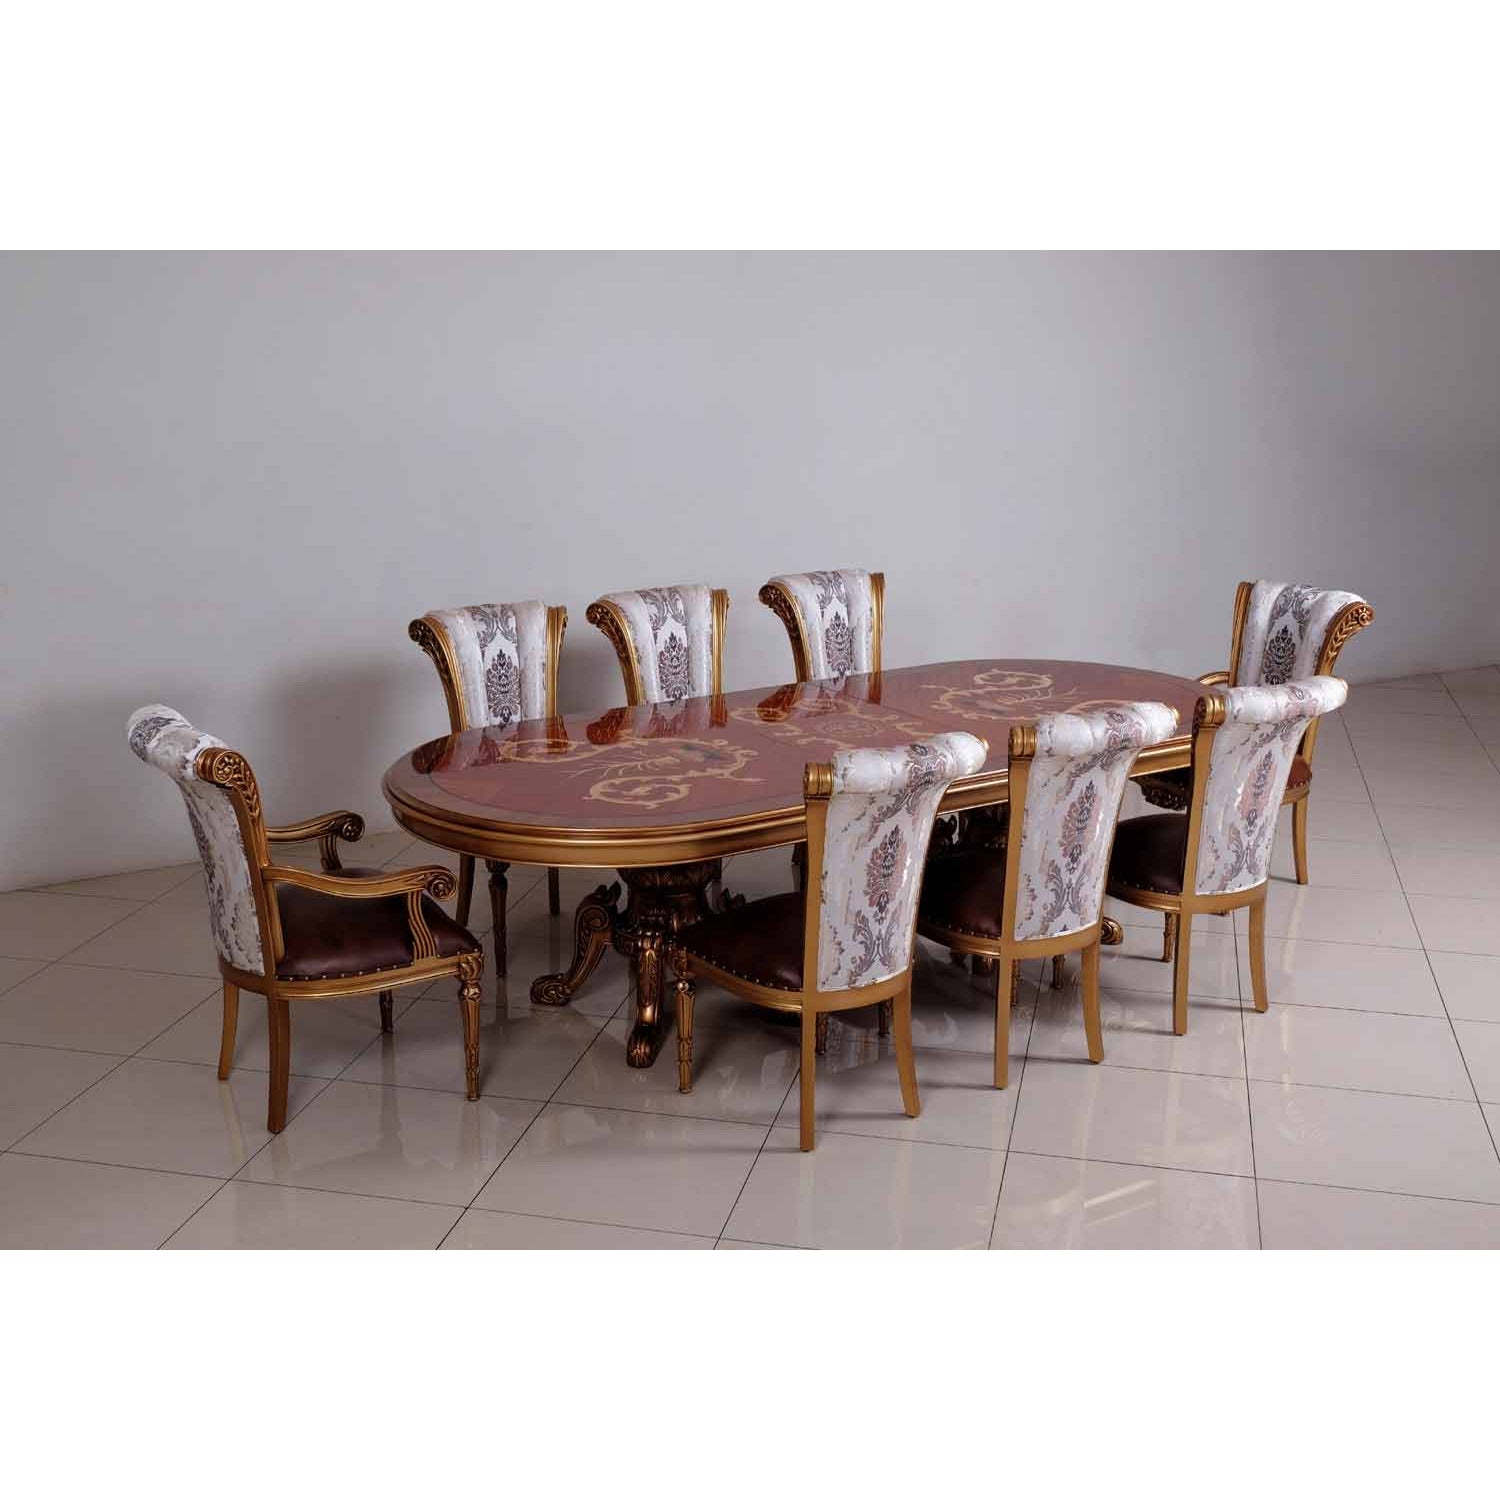 European Furniture - Maggiolini 9 Piece Dining Room Set in Brown and Gold Leaf - 61952-9SET - New Star Living